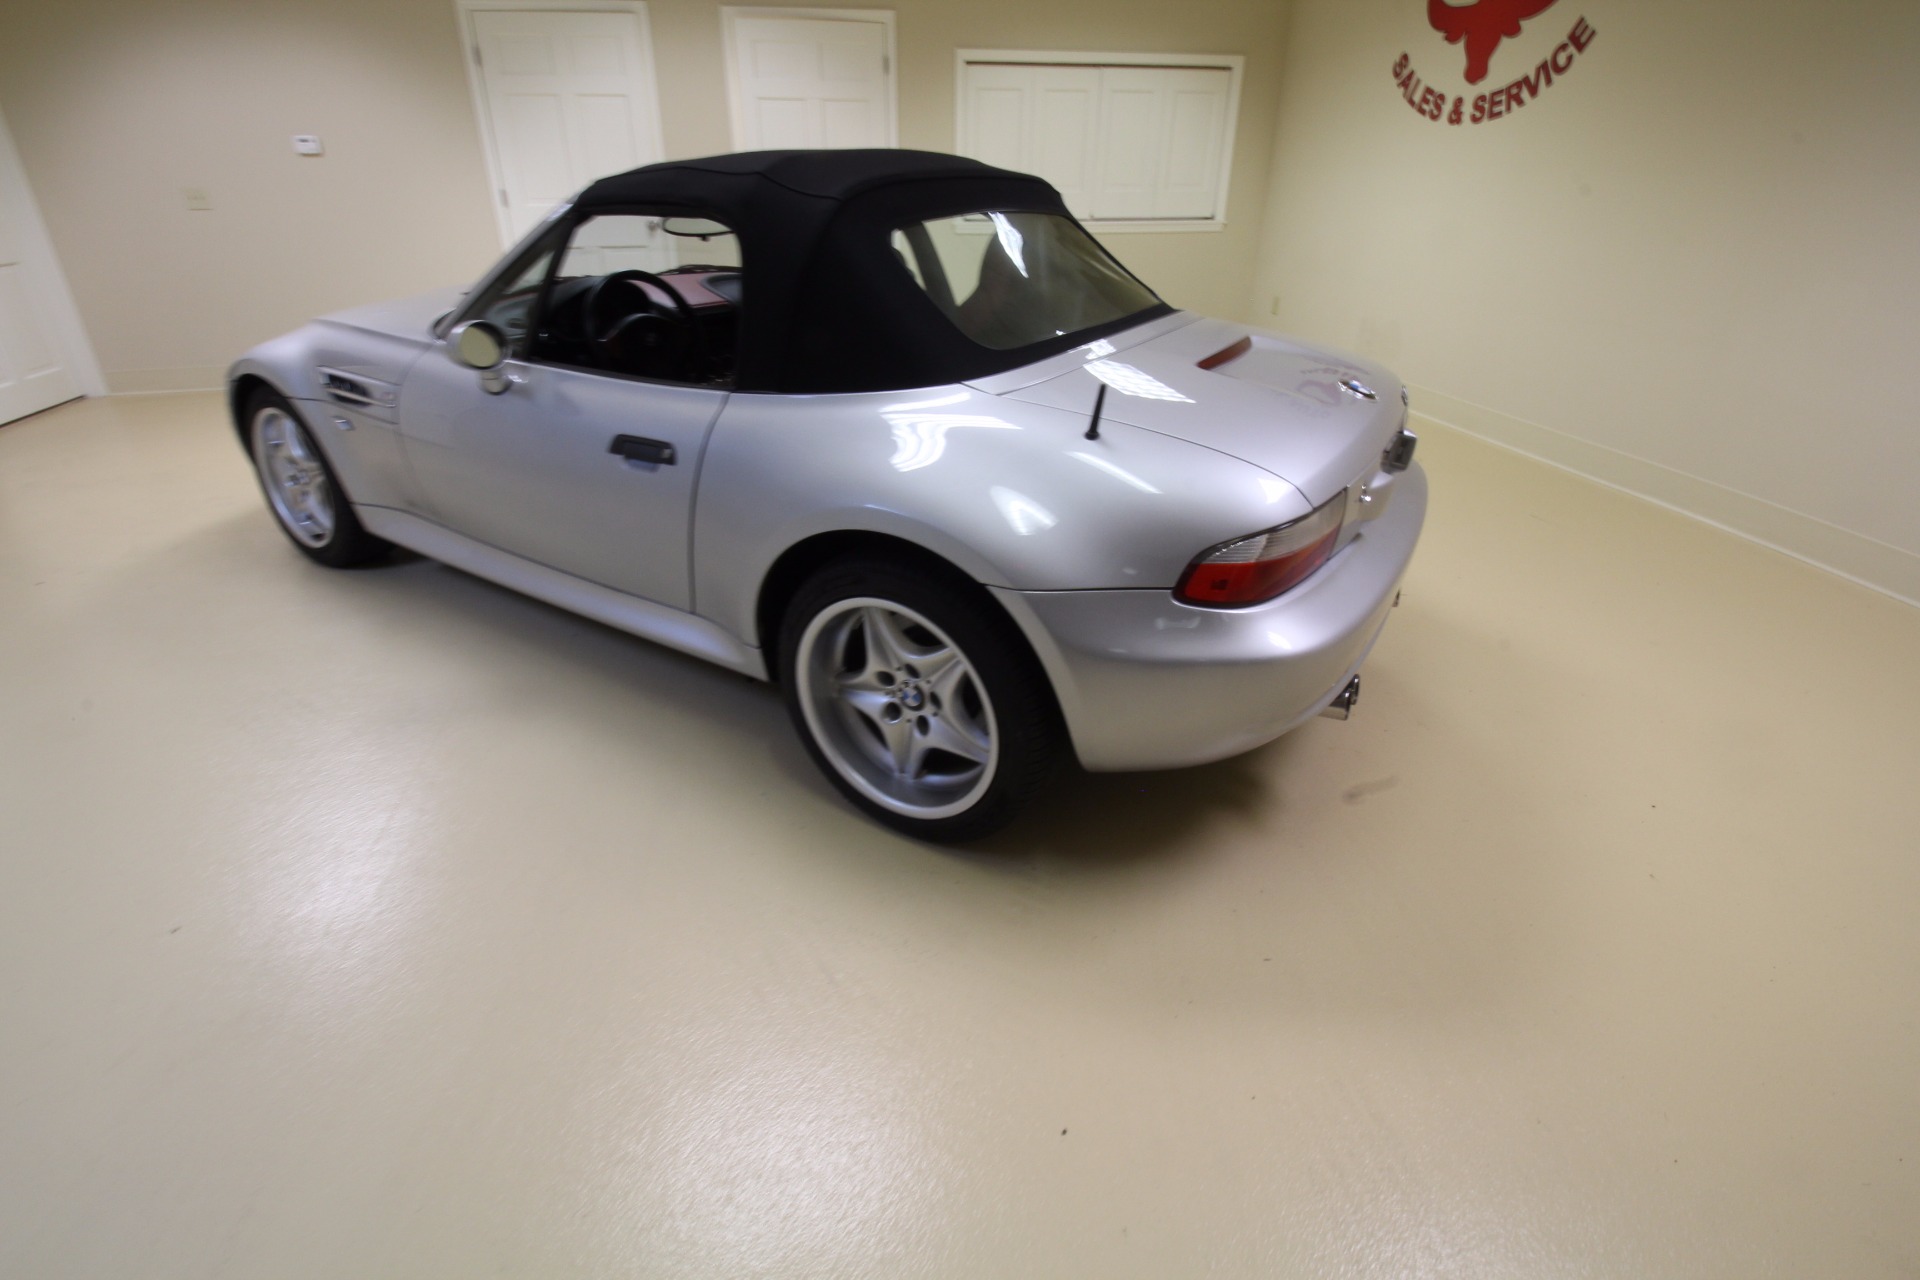 Used 2000 Titanium Silver Metallic with Black Top BMW M Roadster DINAN | Albany, NY